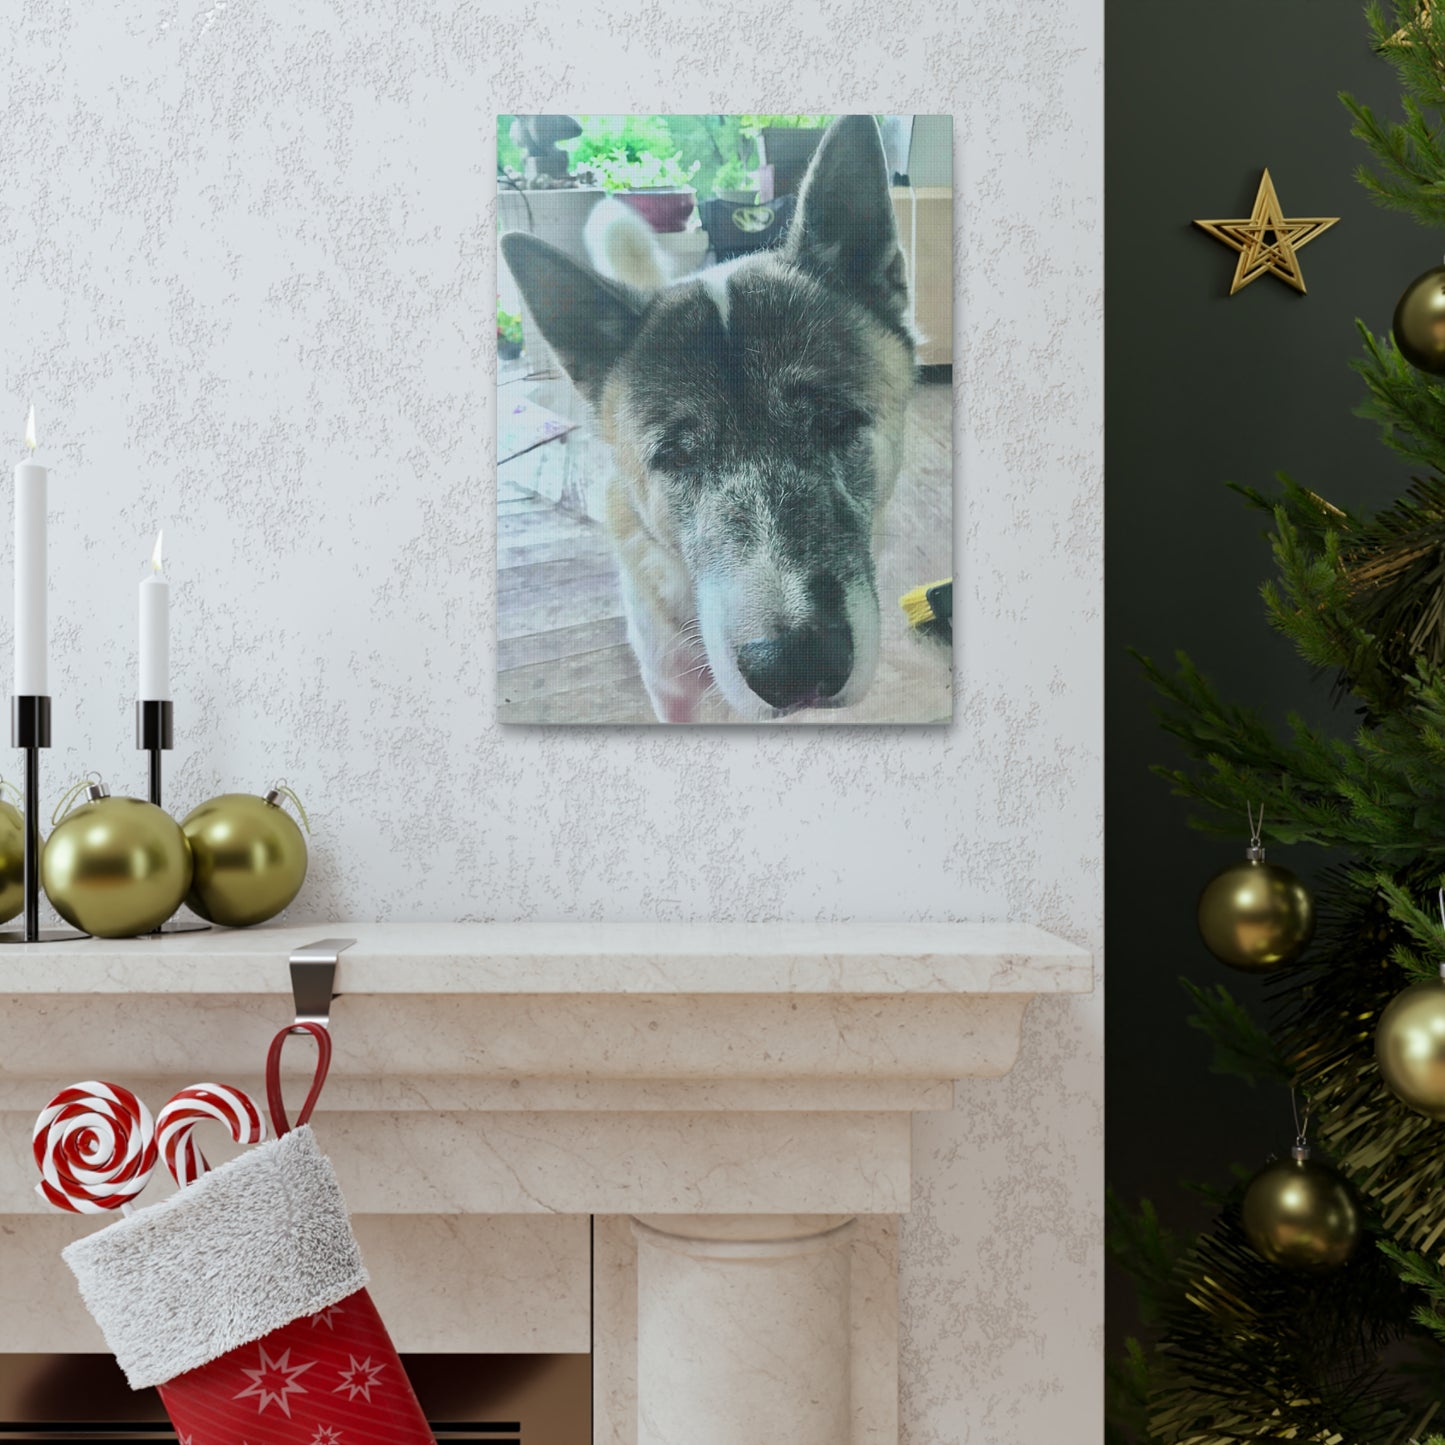 "Dog Photo" Custom Wall Art - Weave Got Gifts - Unique Gifts You Won’t Find Anywhere Else!